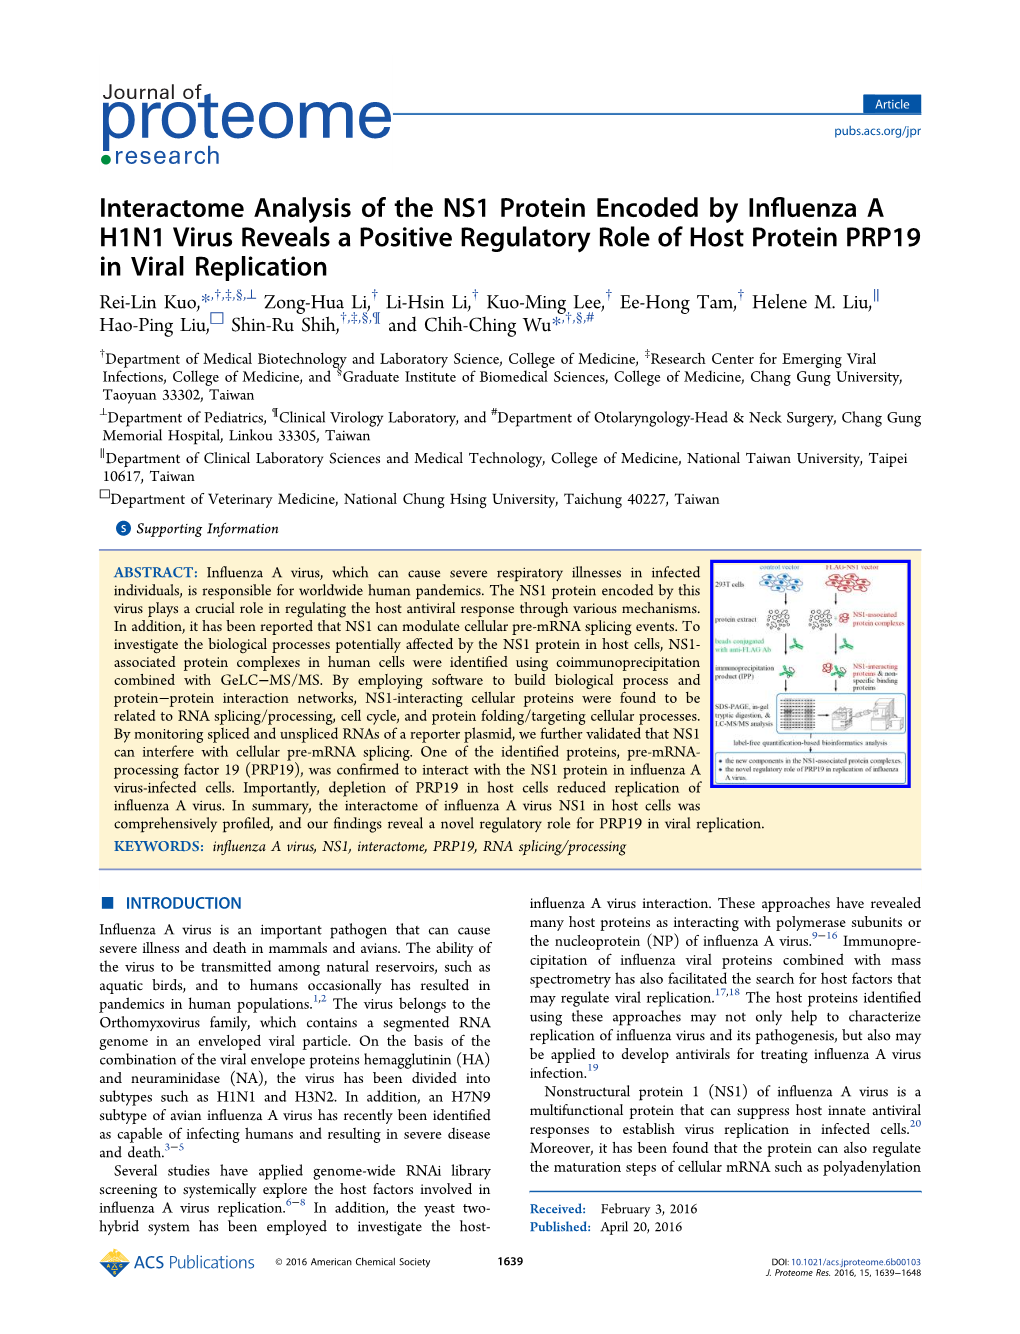 Interactome Analysis of the NS1 Protein Encoded by Influenza A